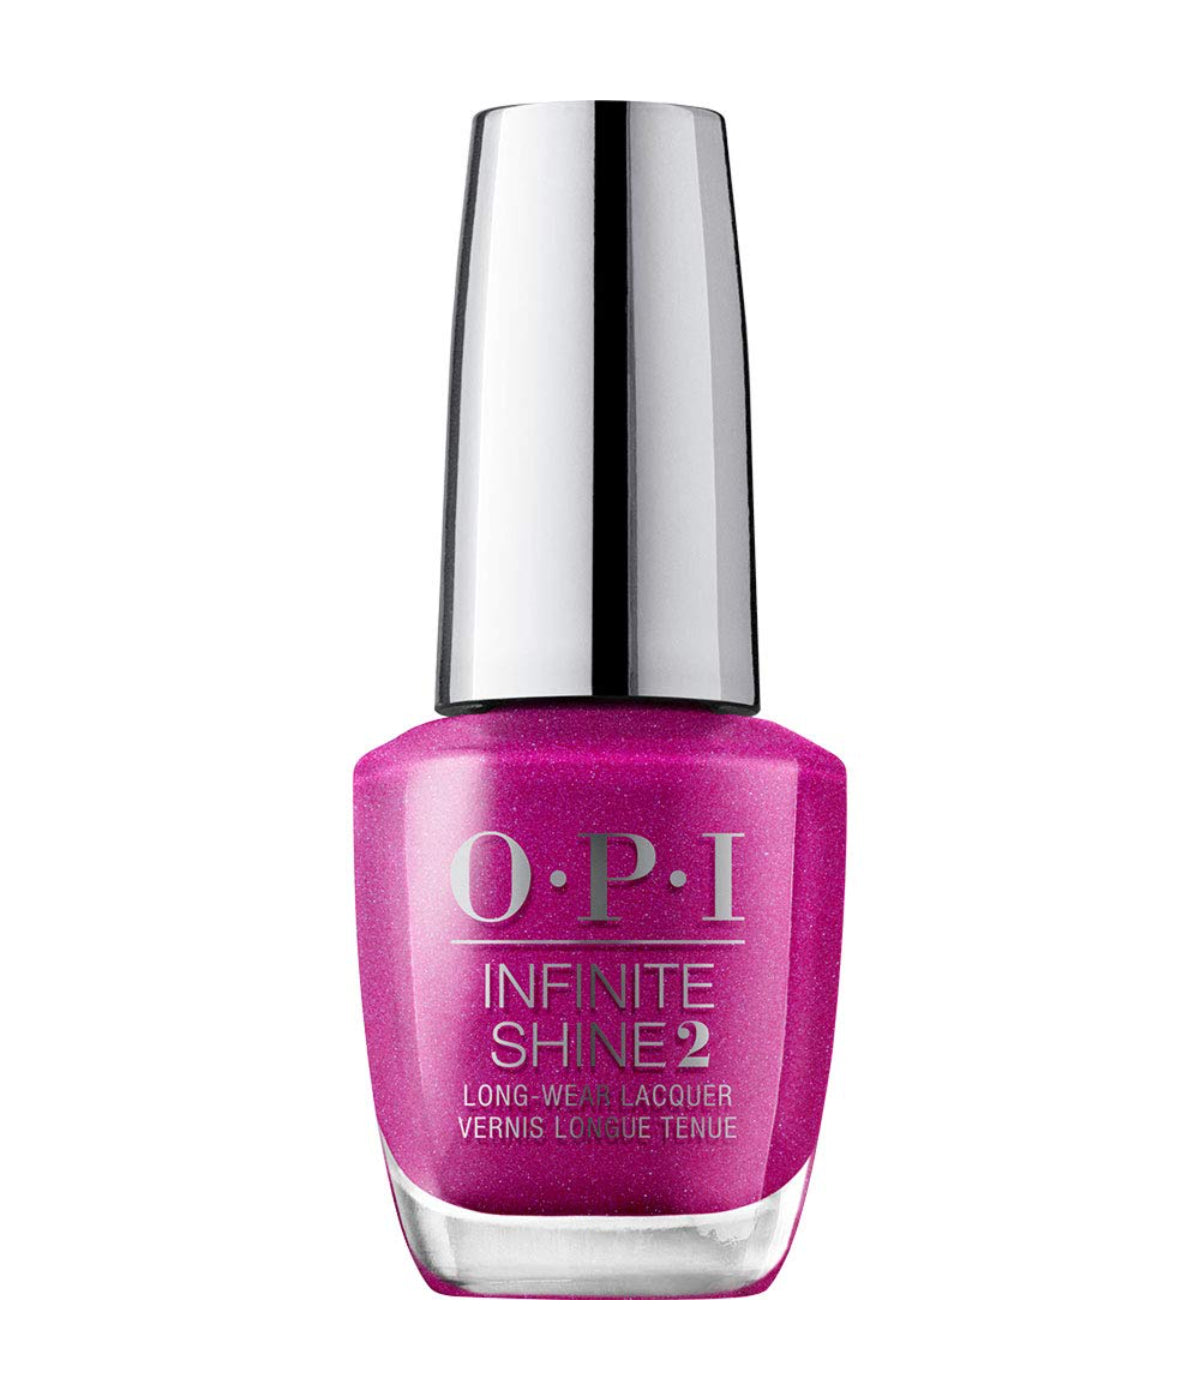 OPI Infinite Shine 2, Tokyo Collection, All Your Dreams in Vending Machines, 15mL